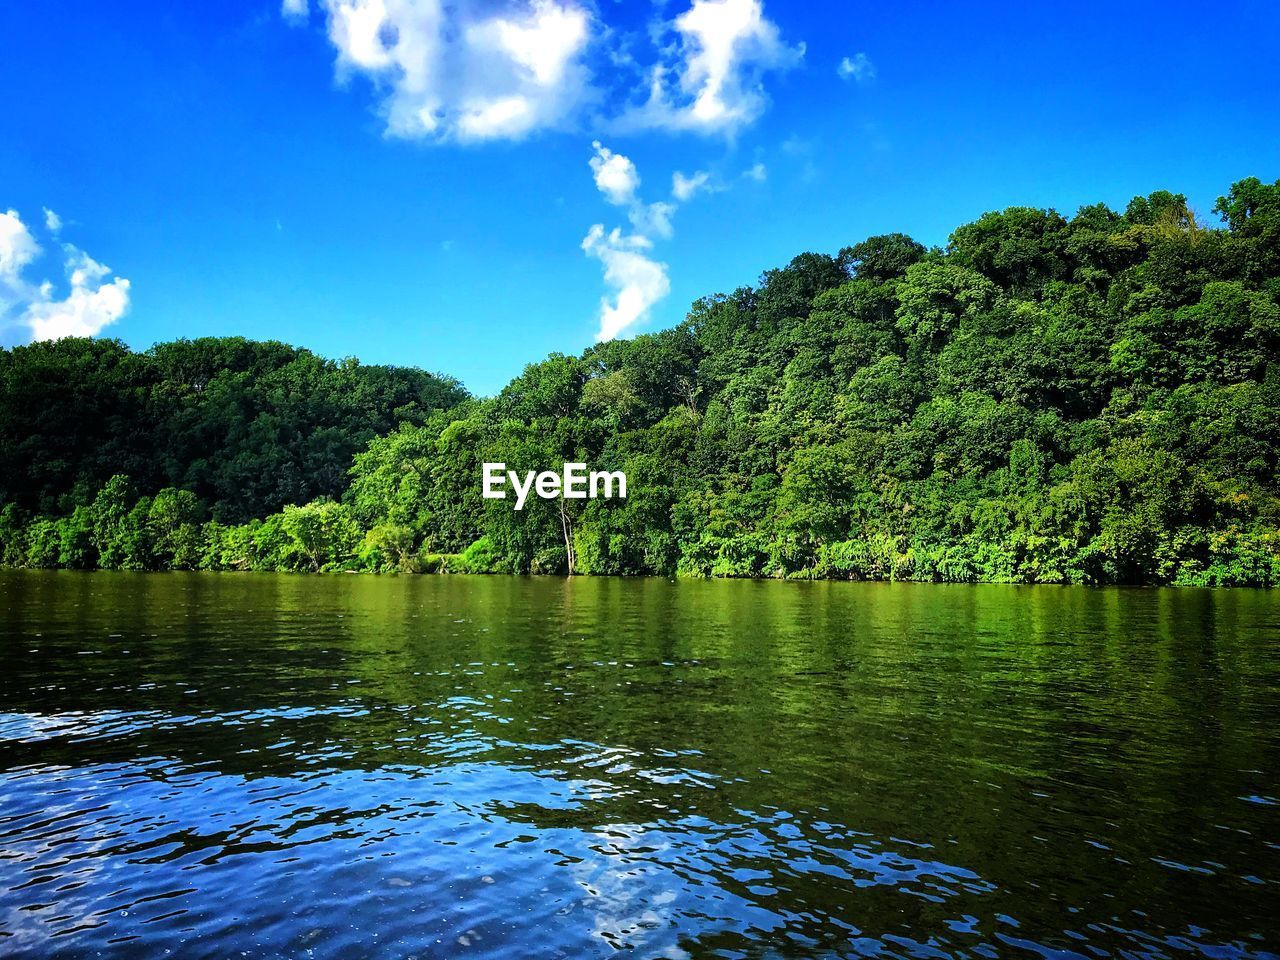 SCENIC VIEW OF LAKE BY TREES AGAINST SKY